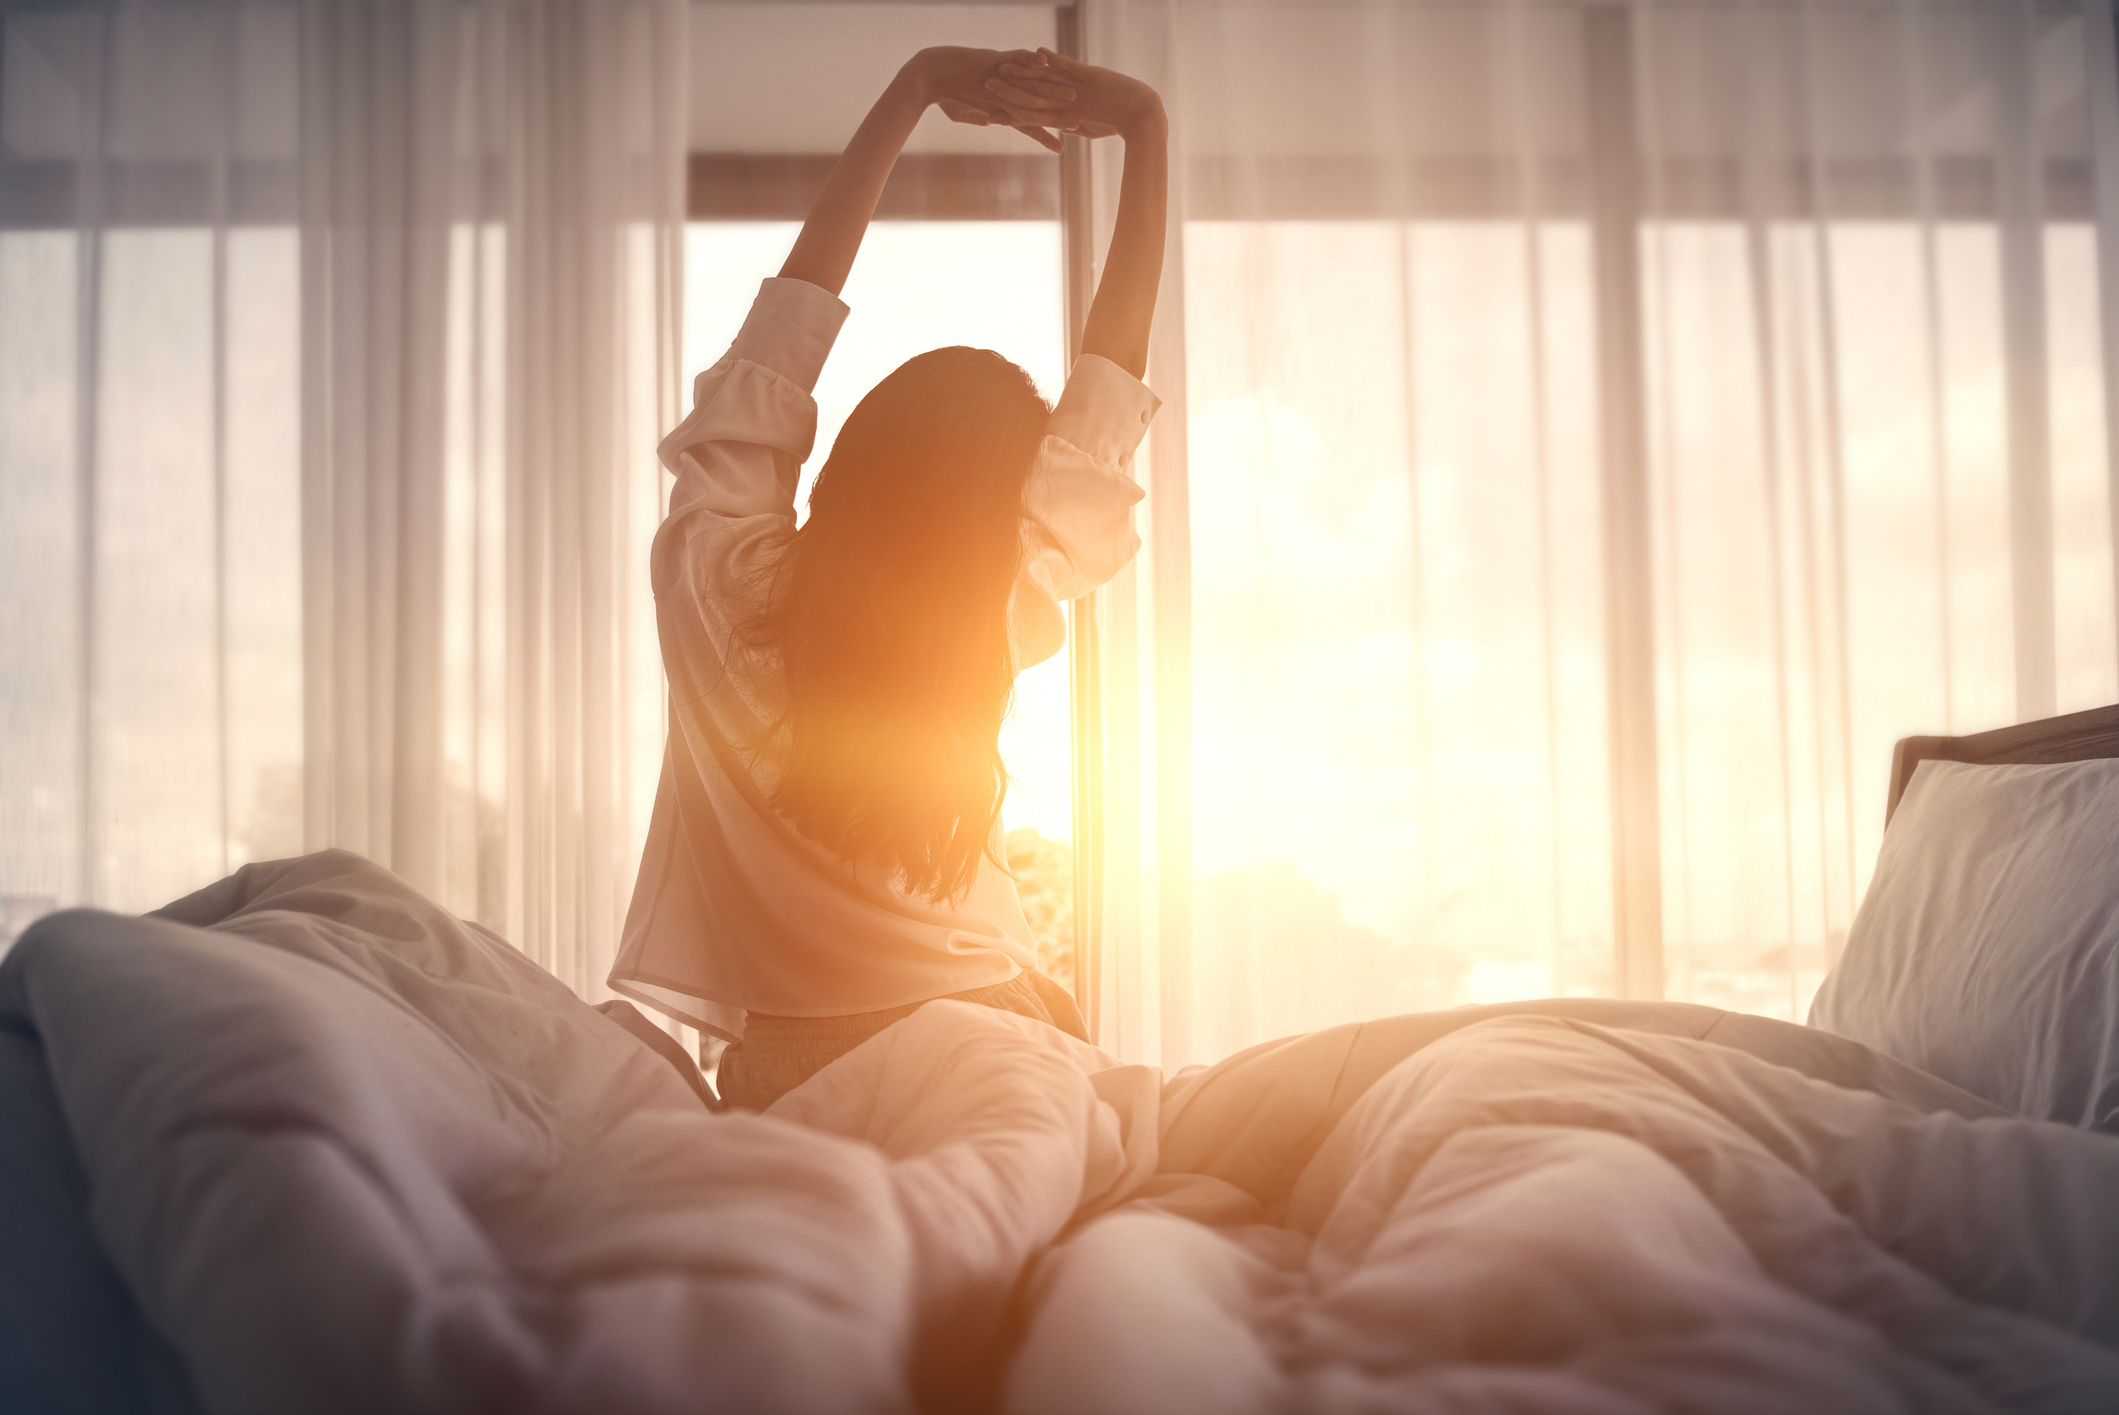 Getting more sleep reduces caloric intake, a game changer for